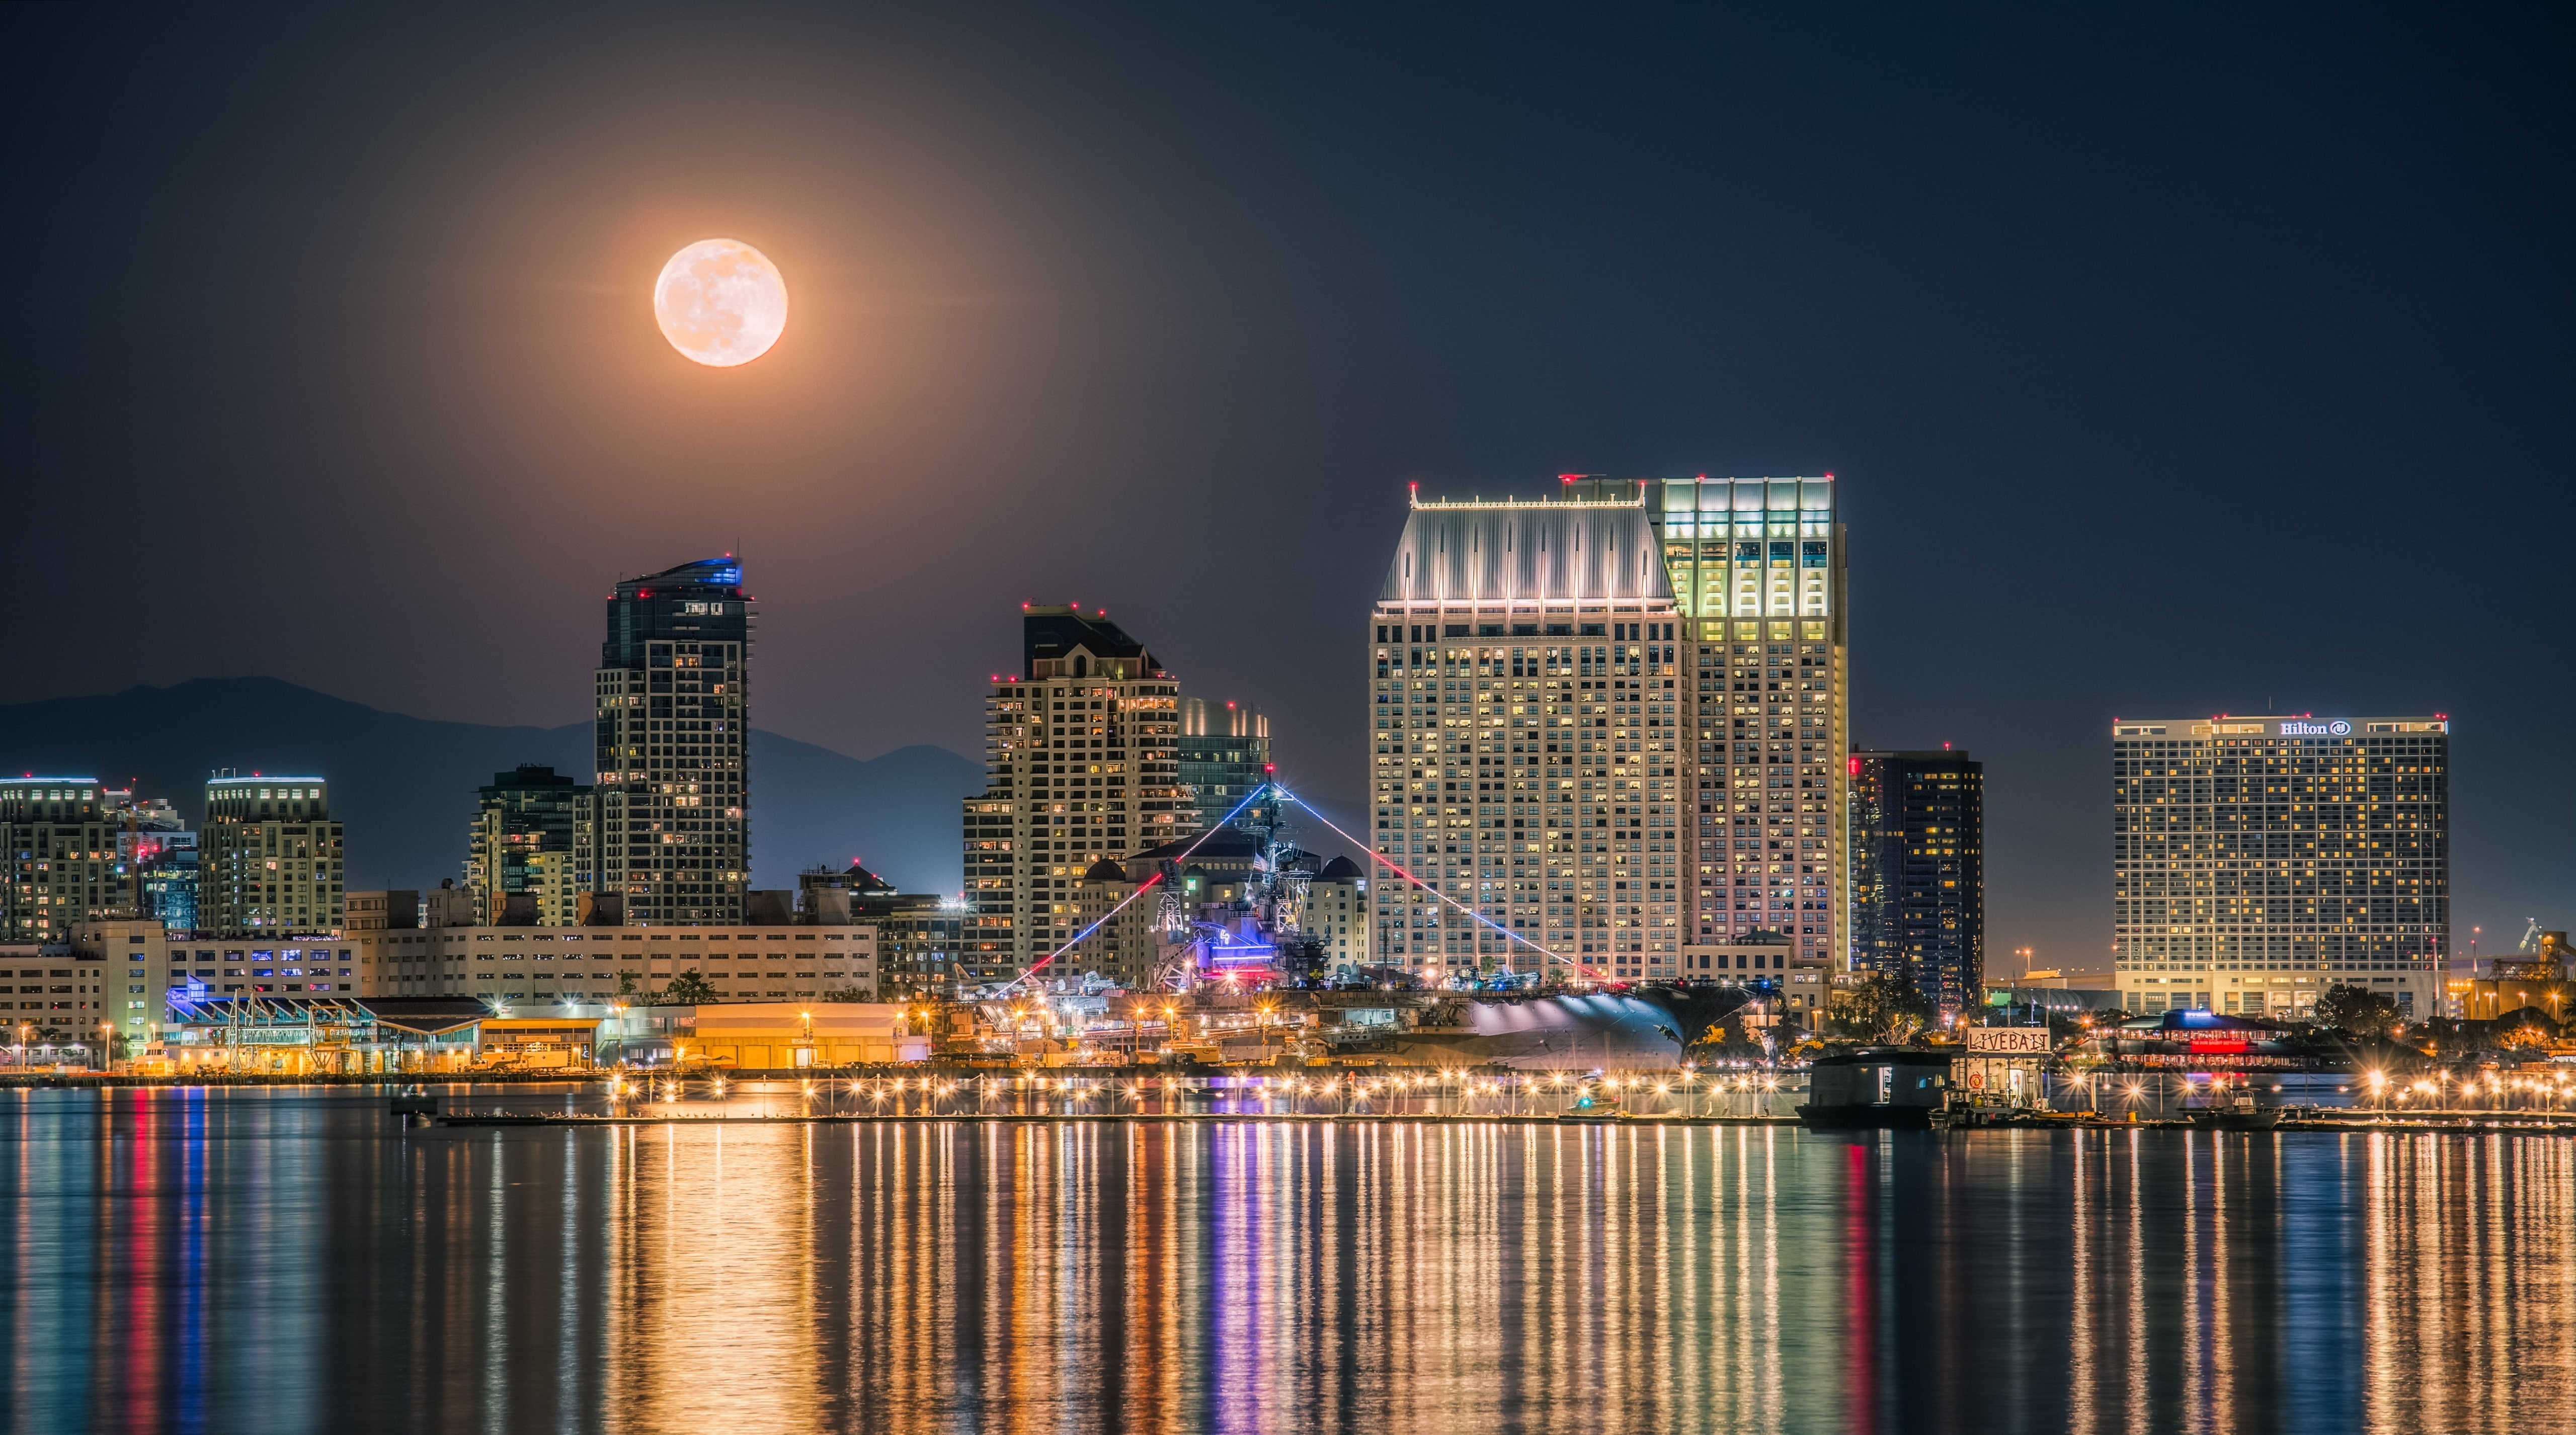 The Full Moon rising over the Downtown San..., gray concrete buildings